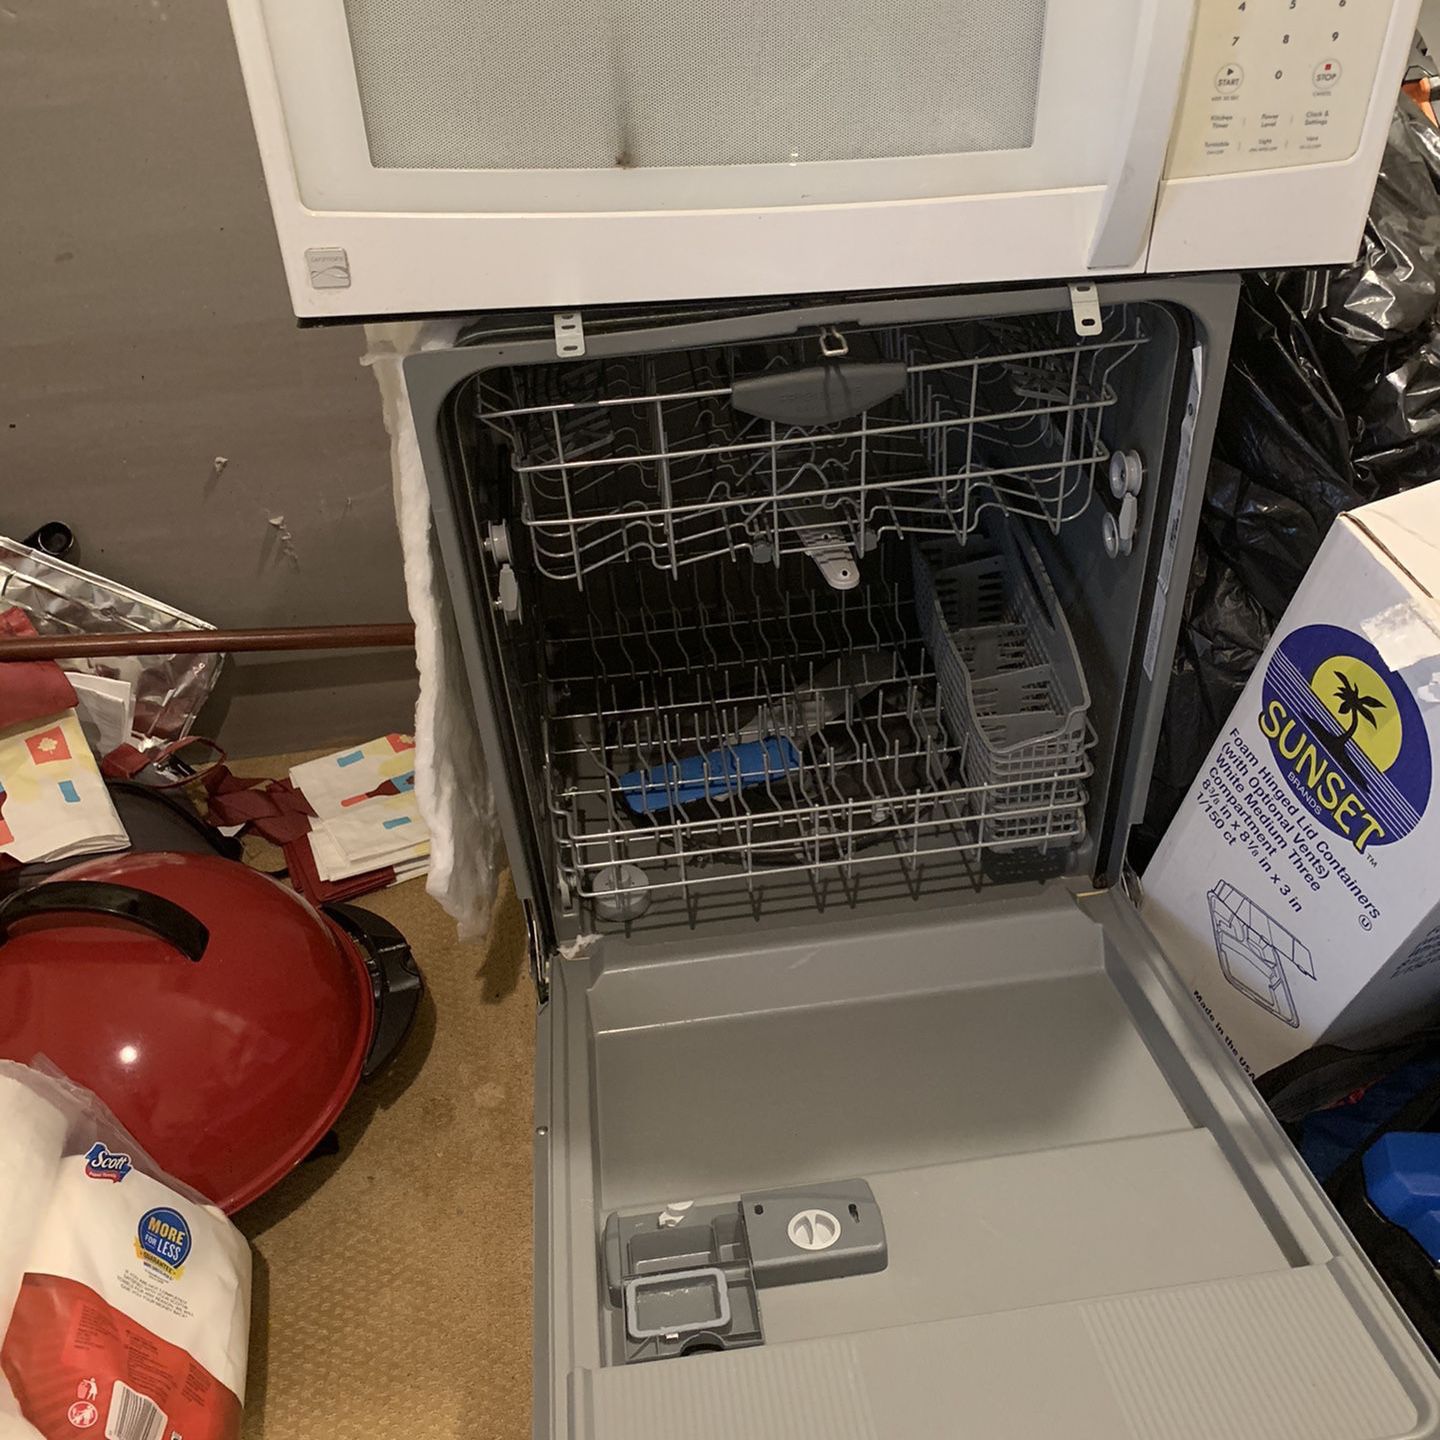 Kenmorekenmore Microwave and Frigidaire Dishwasher for sale asking $ 200. 00 for all two, these items are less than 3years old